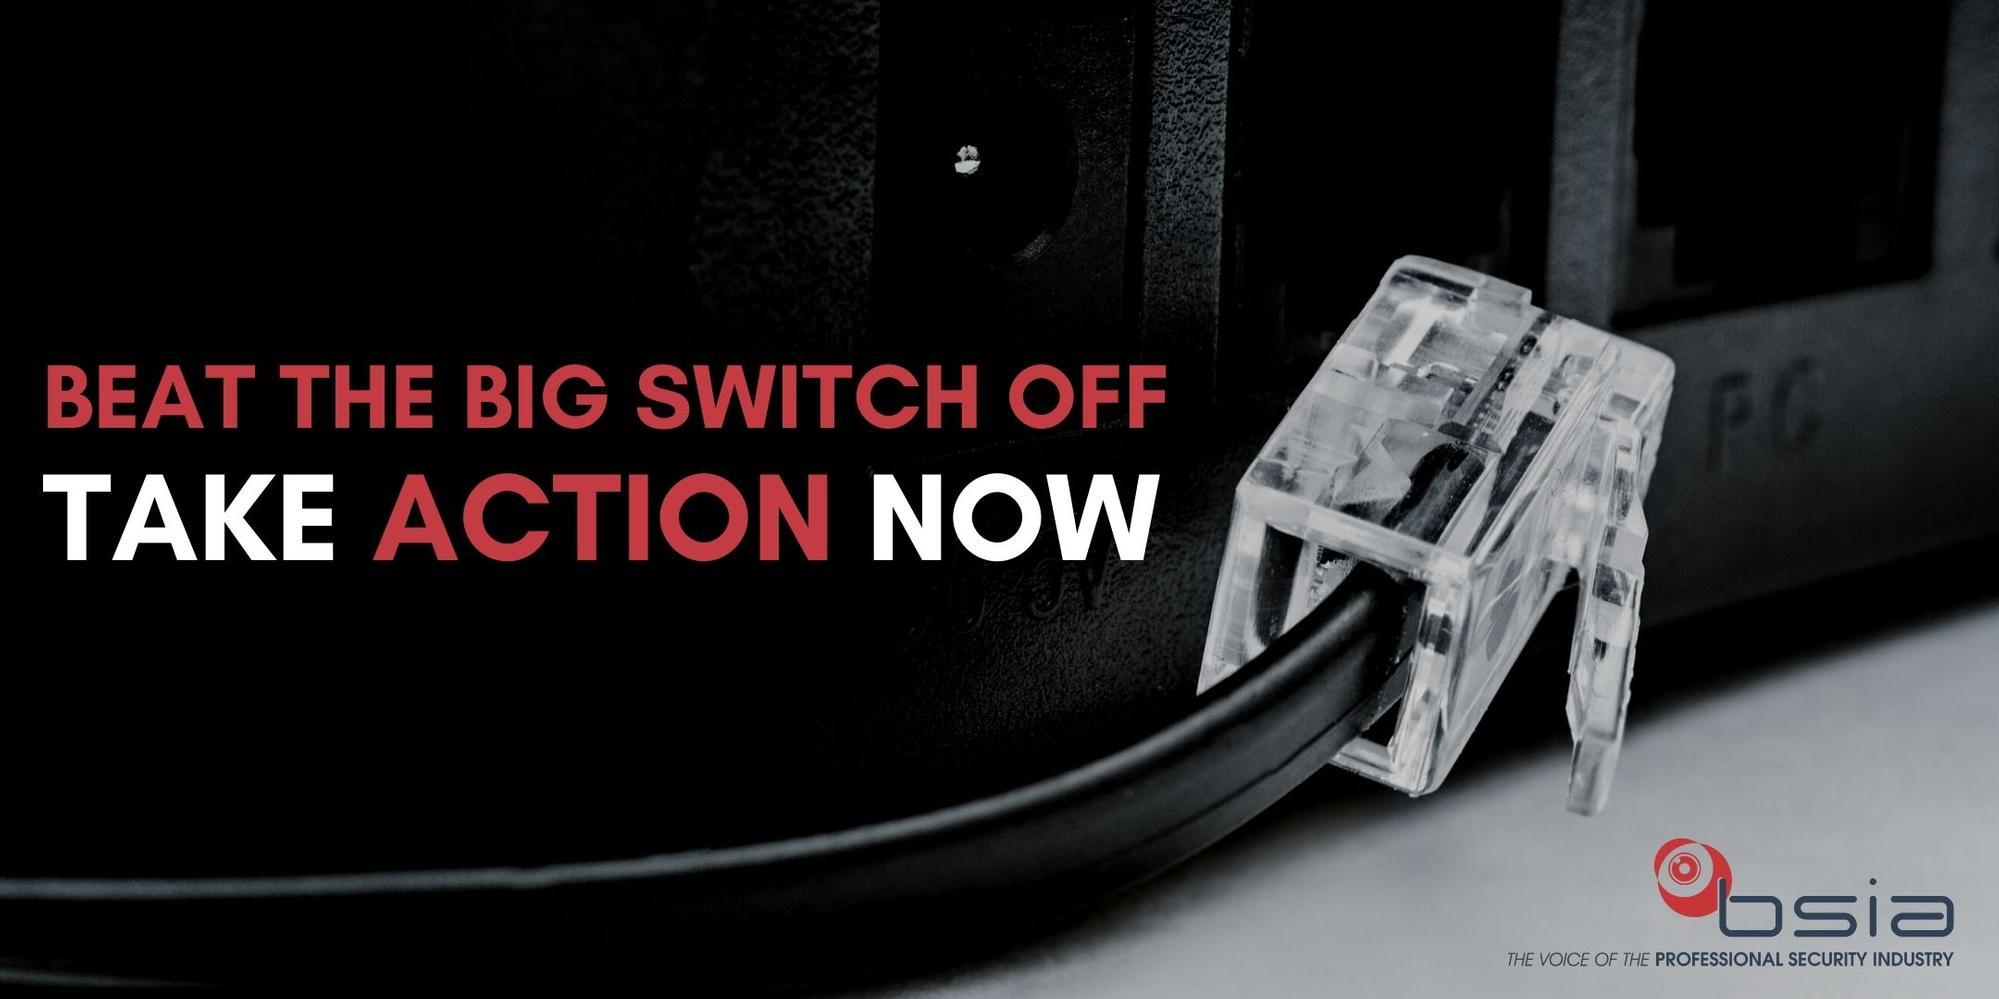 Installer toolkit developed to encourage end users to ‘Beat the Big Switch Off’